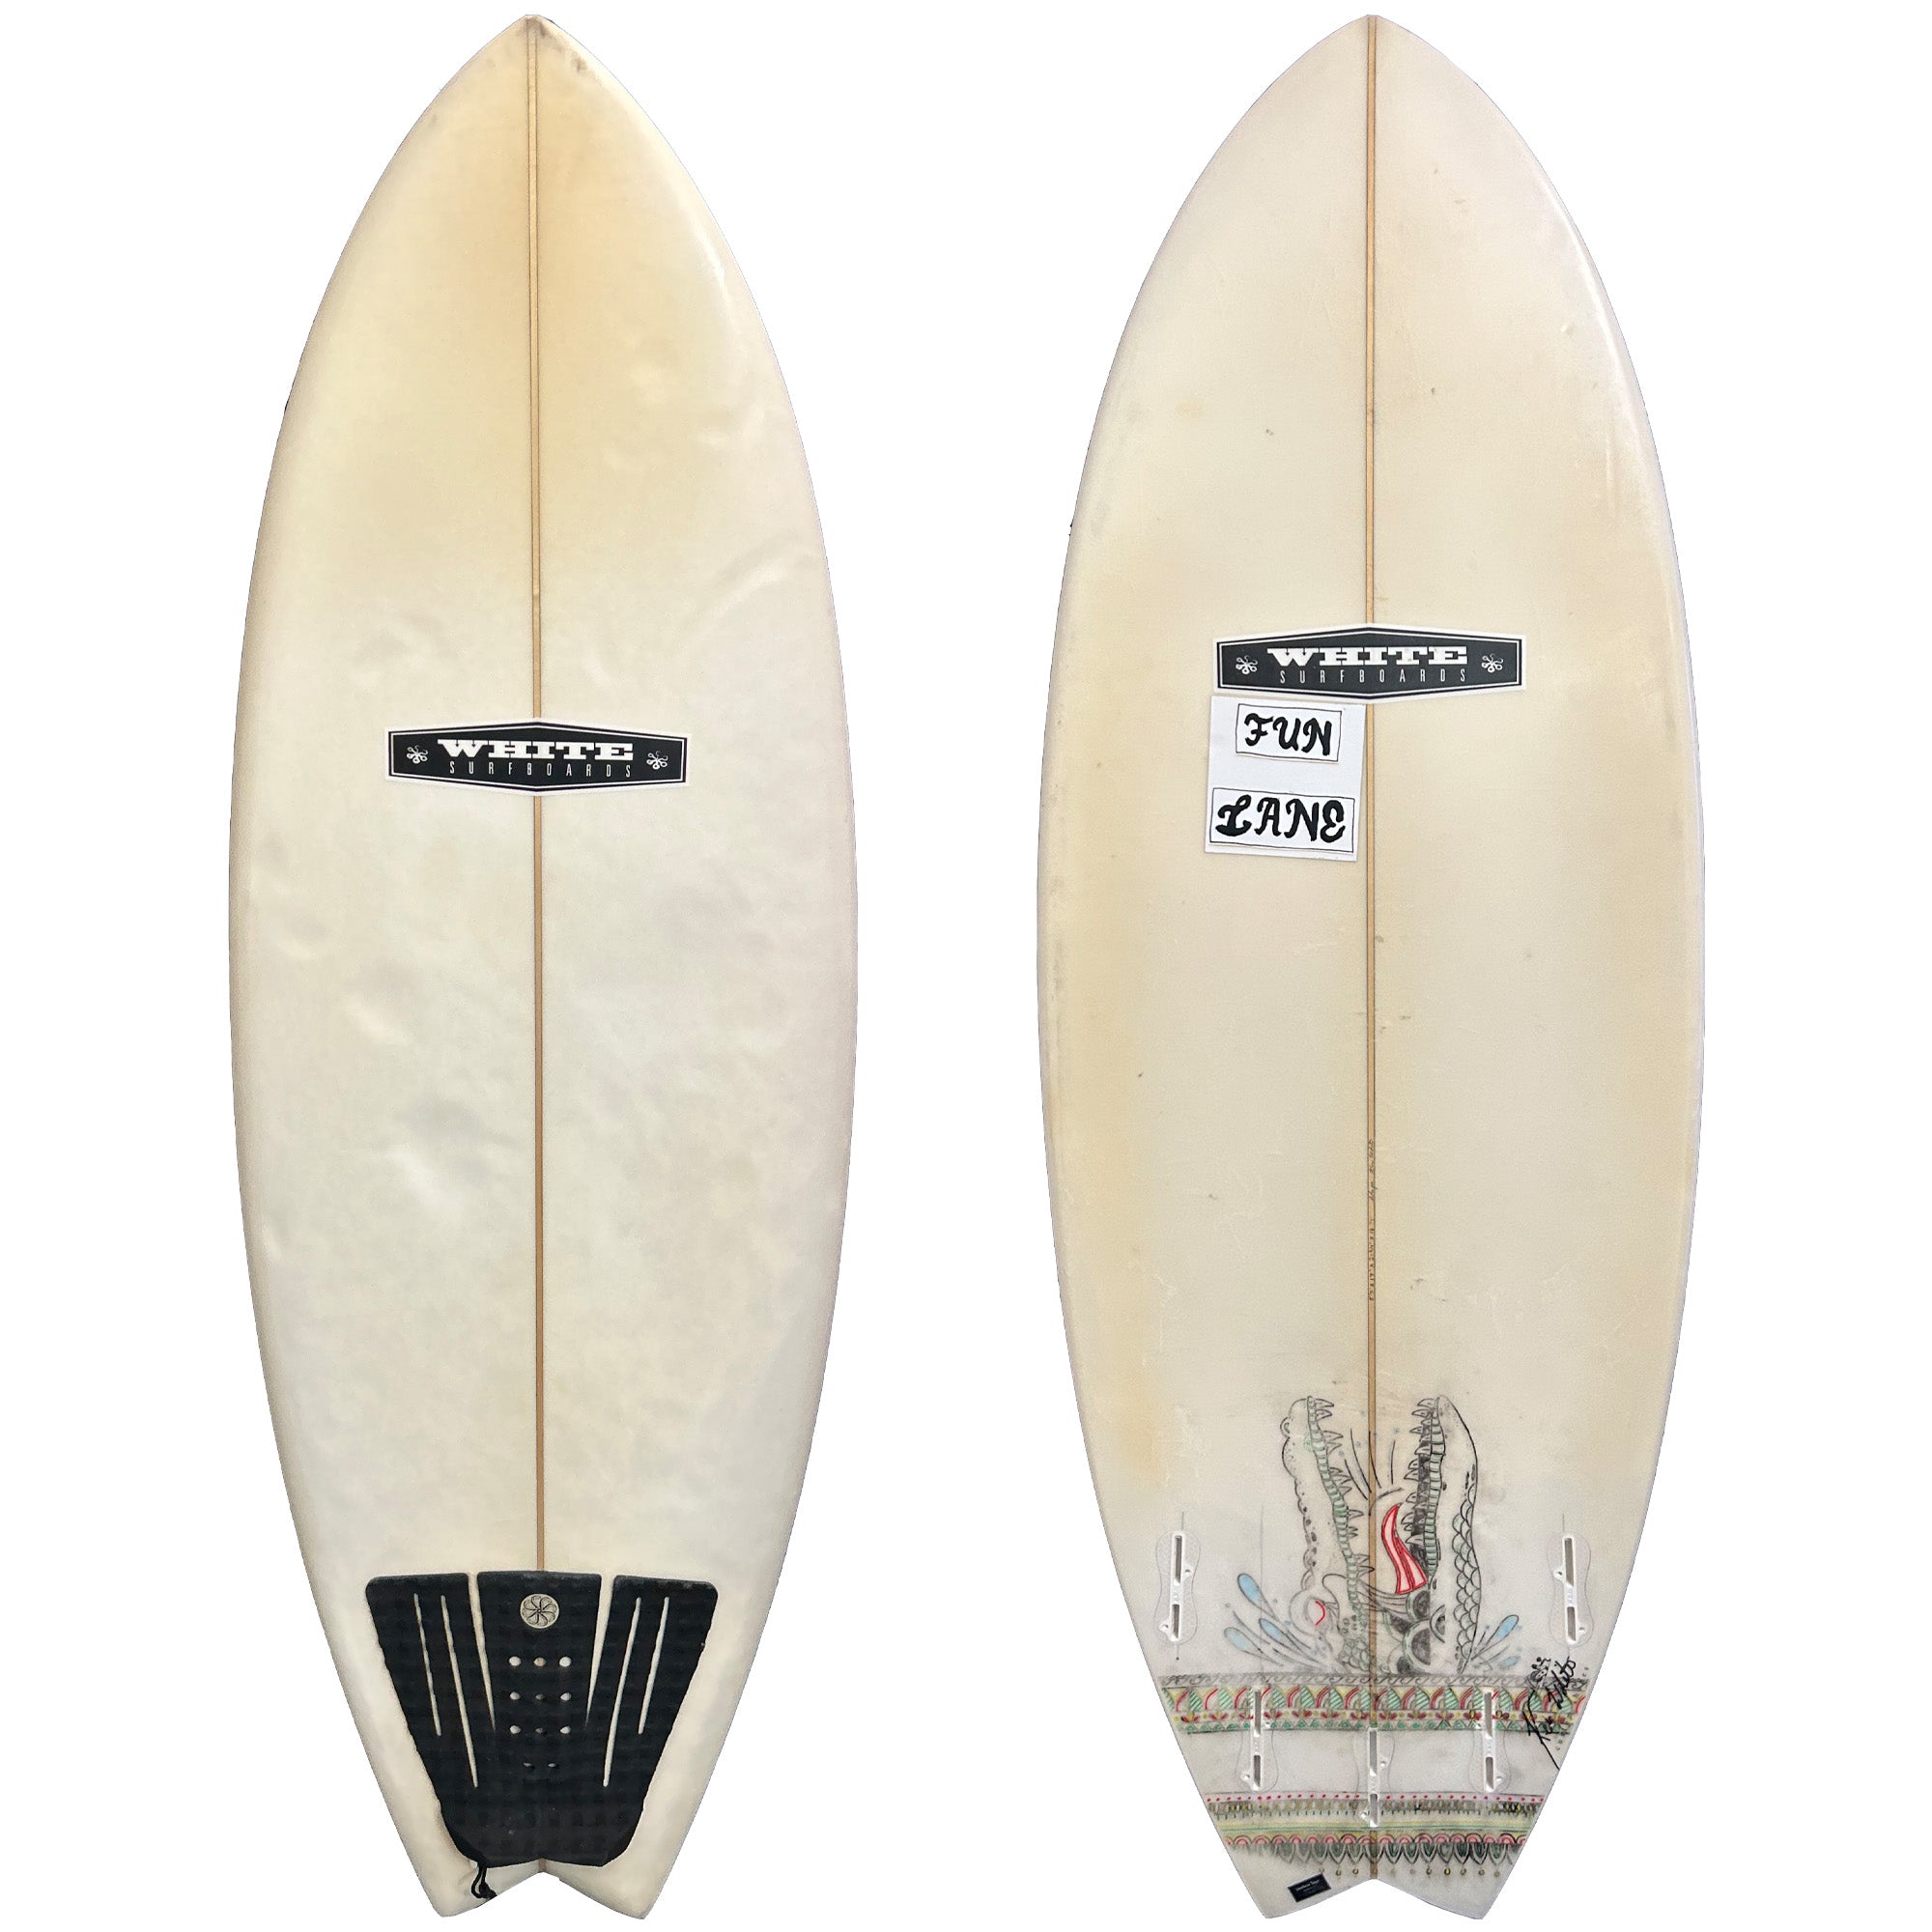 Ken White 5'5 Consignment Surfboard